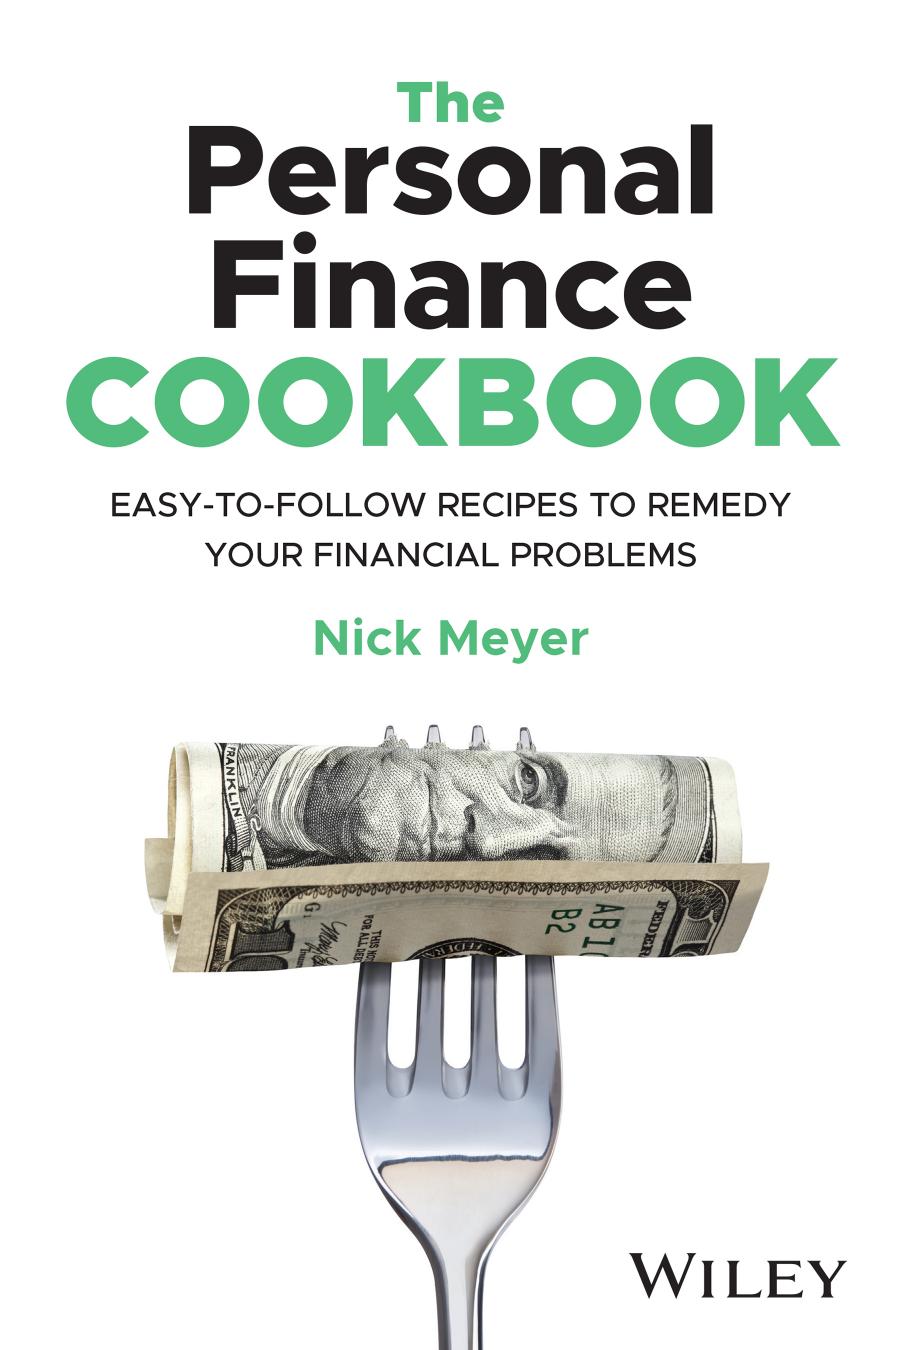 The Personal Finance Cookbook: Easy-To-Follow Recipes to Remedy Your Financial Problems